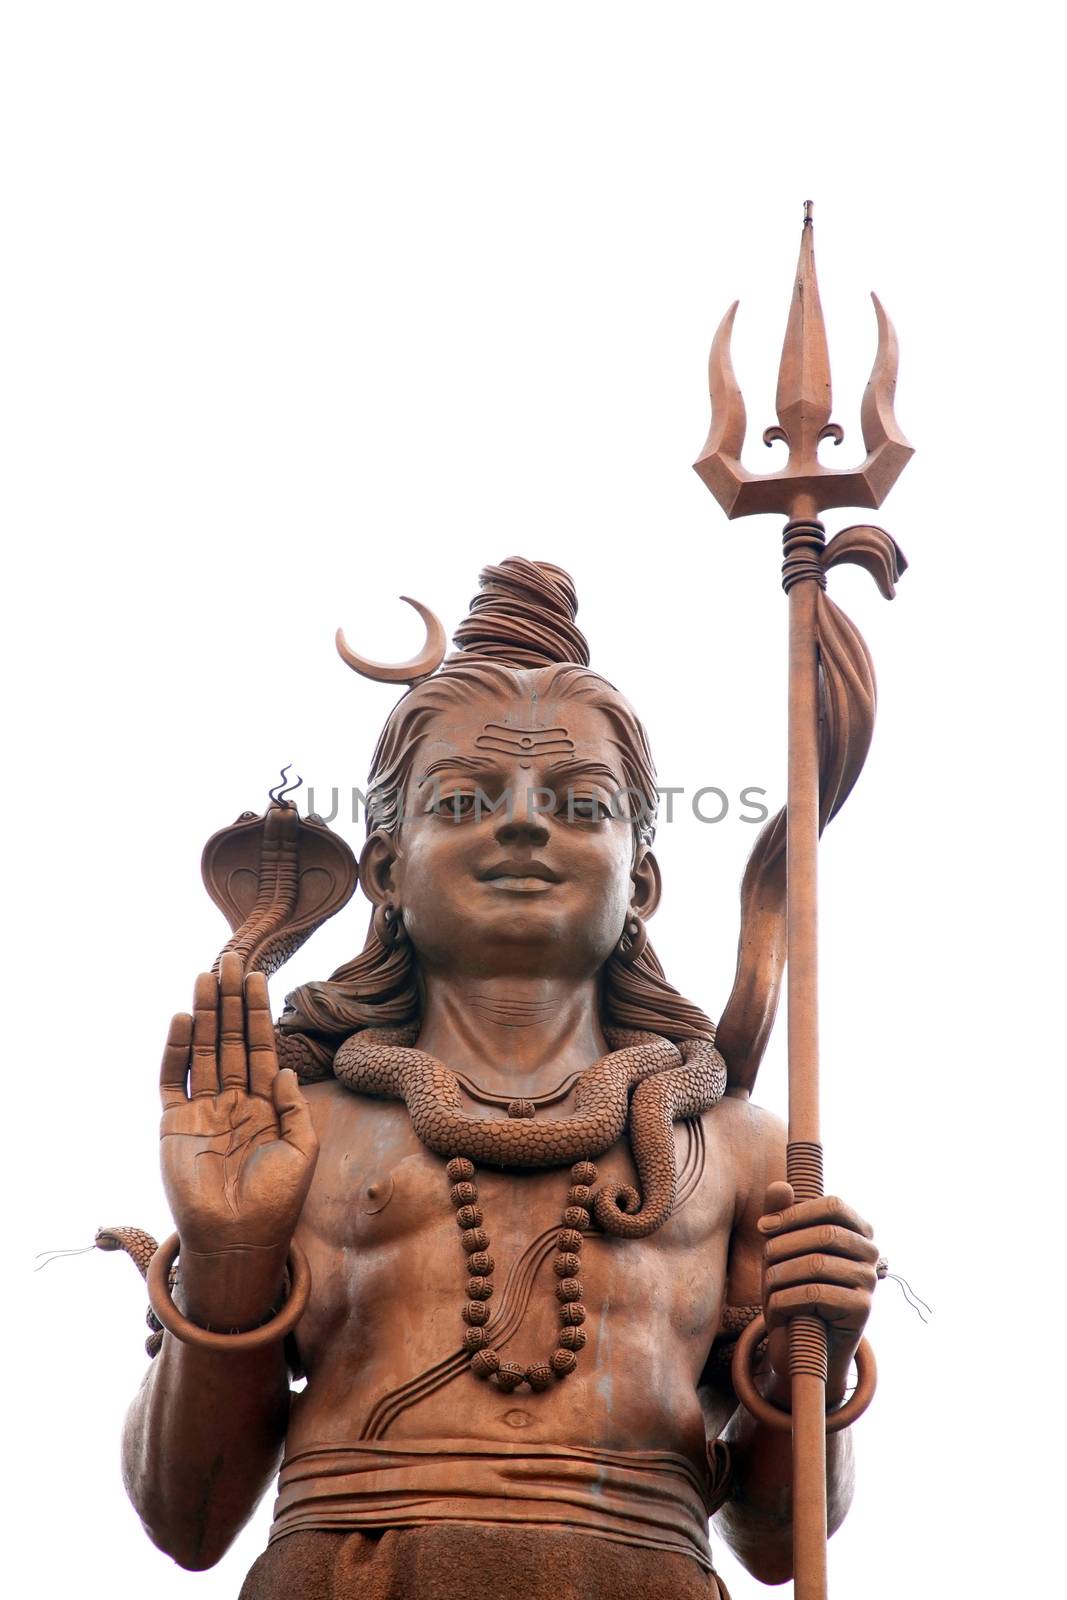 Statue of Lord Shiva on white background. Mauritius